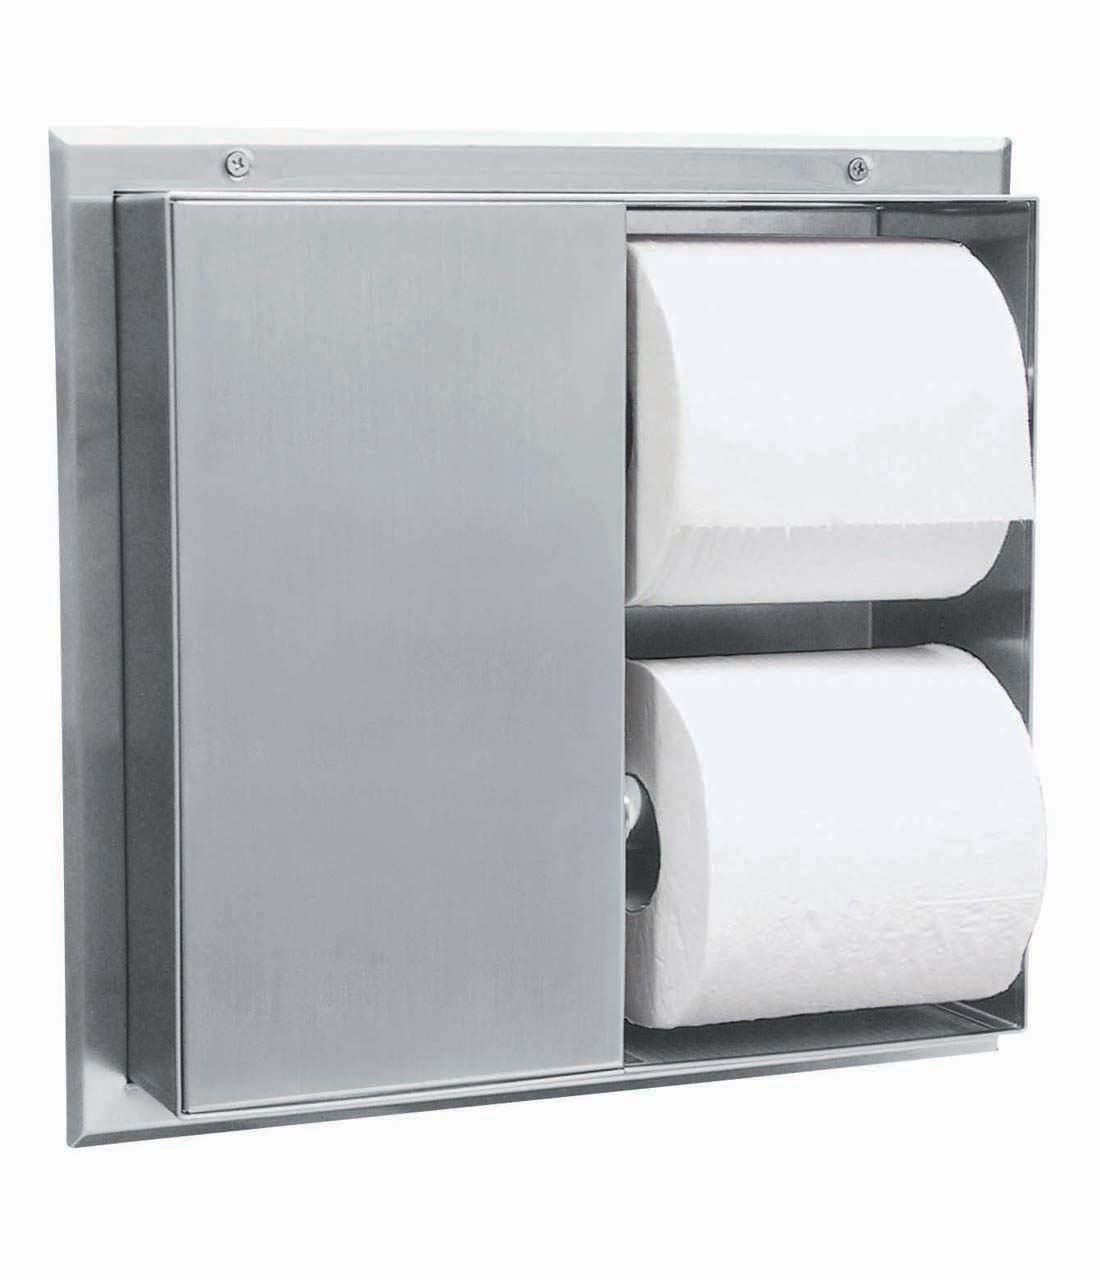 Partition-Mounted Multi-Roll Toilet Tissue Dispenser (Serves 2 Compartments) Image